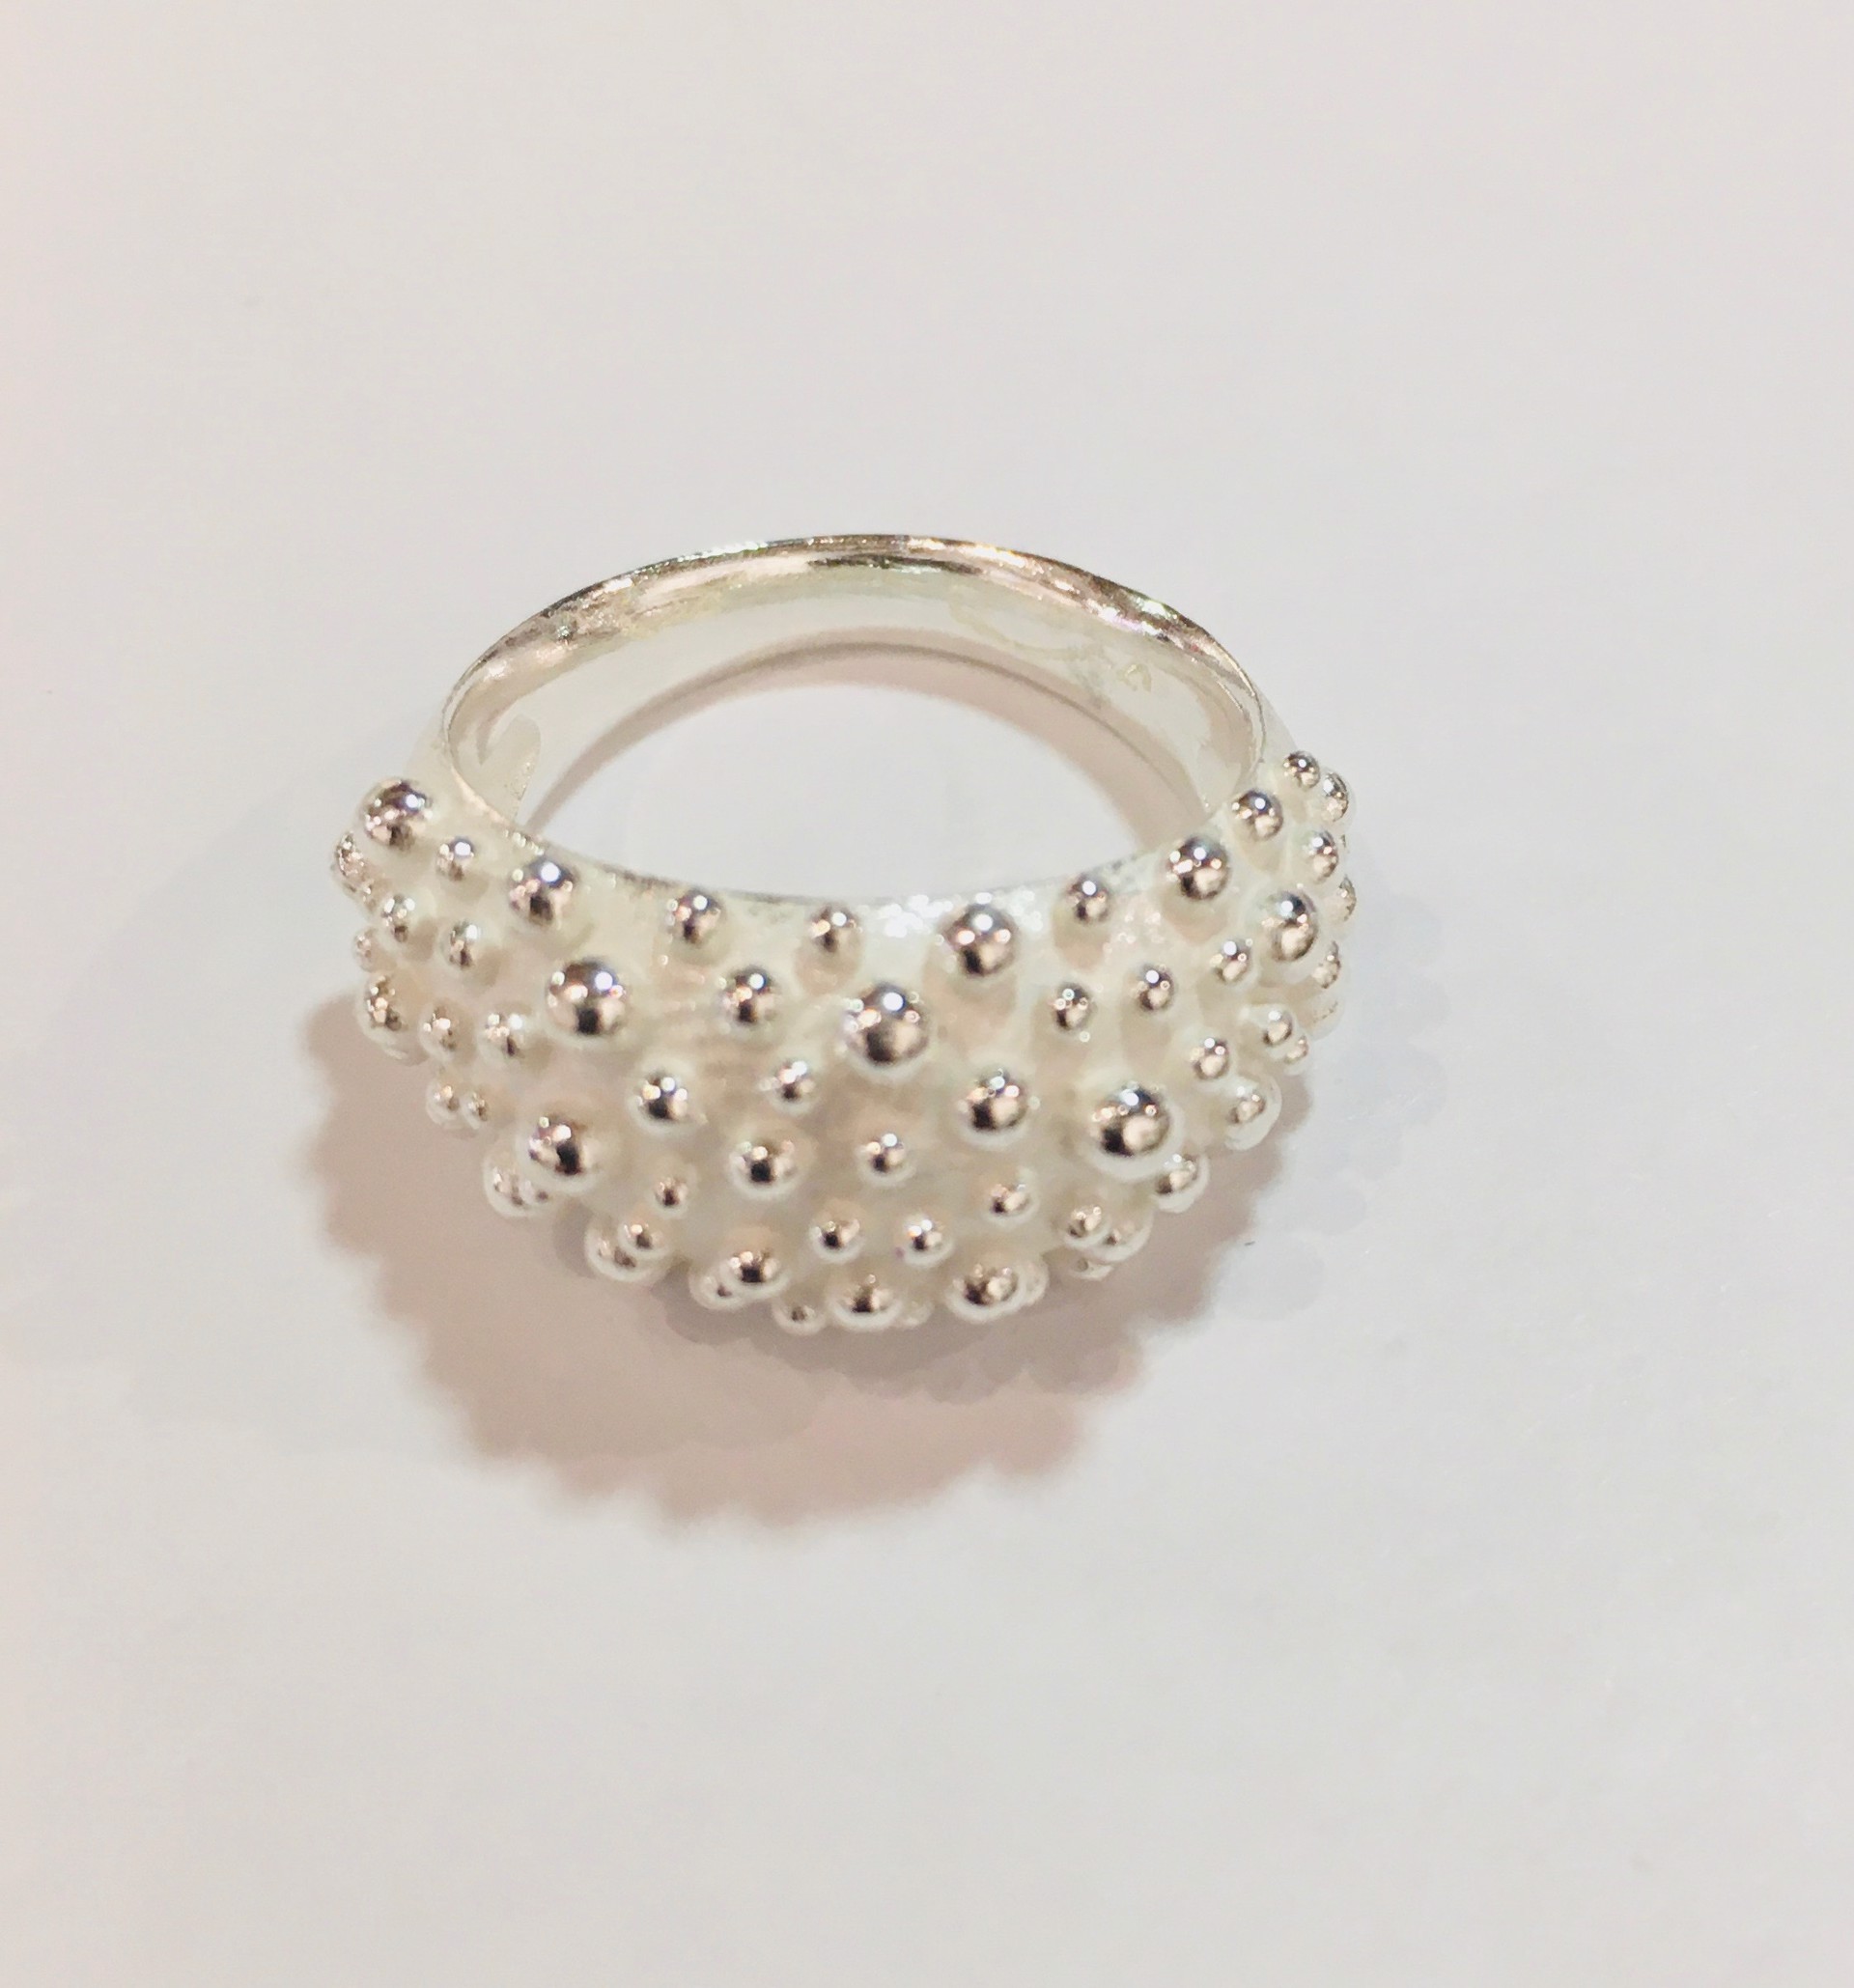 Silver Dome Ring by DAHLIA KANNER